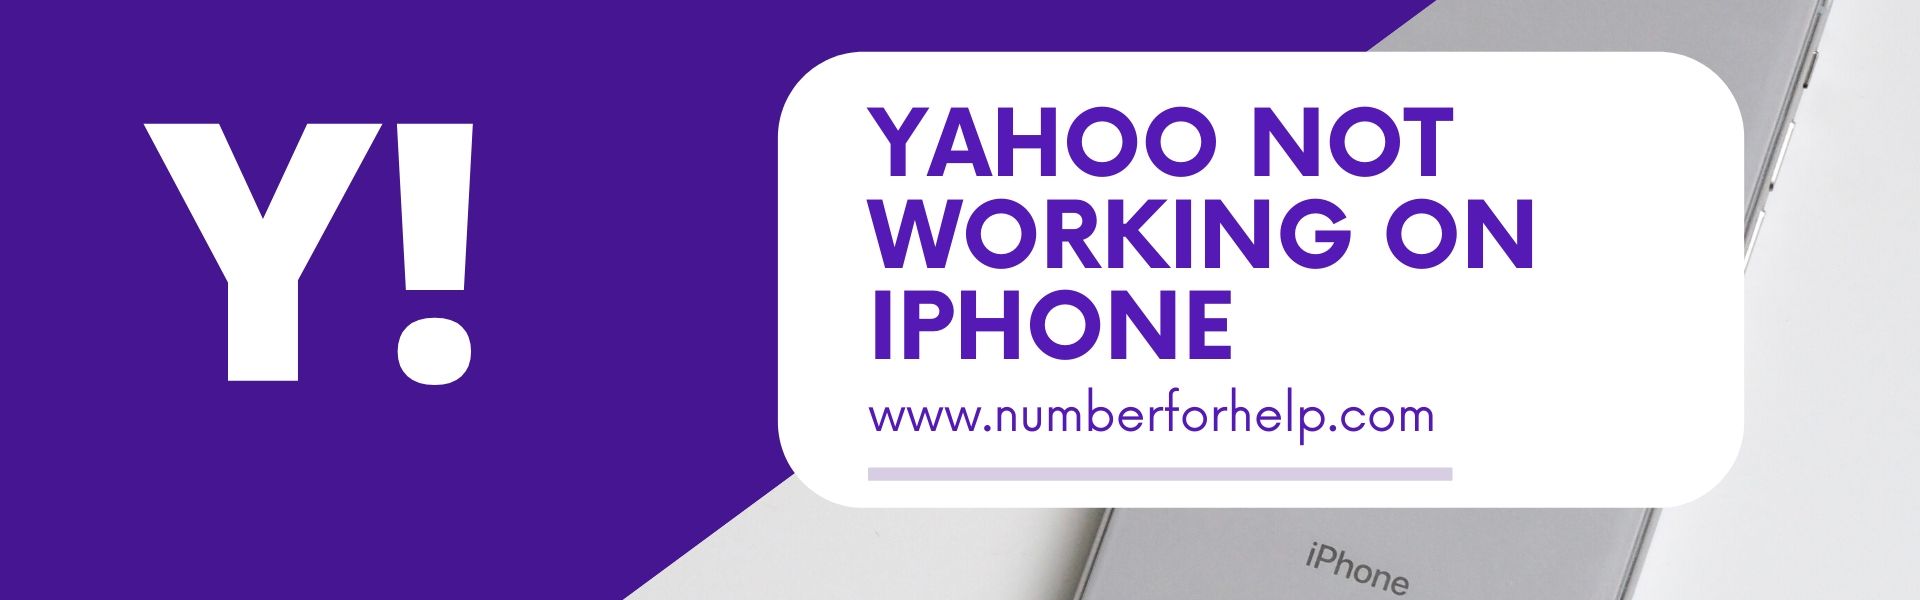 2020-05-15-05-58-48yahoo not working on iphone